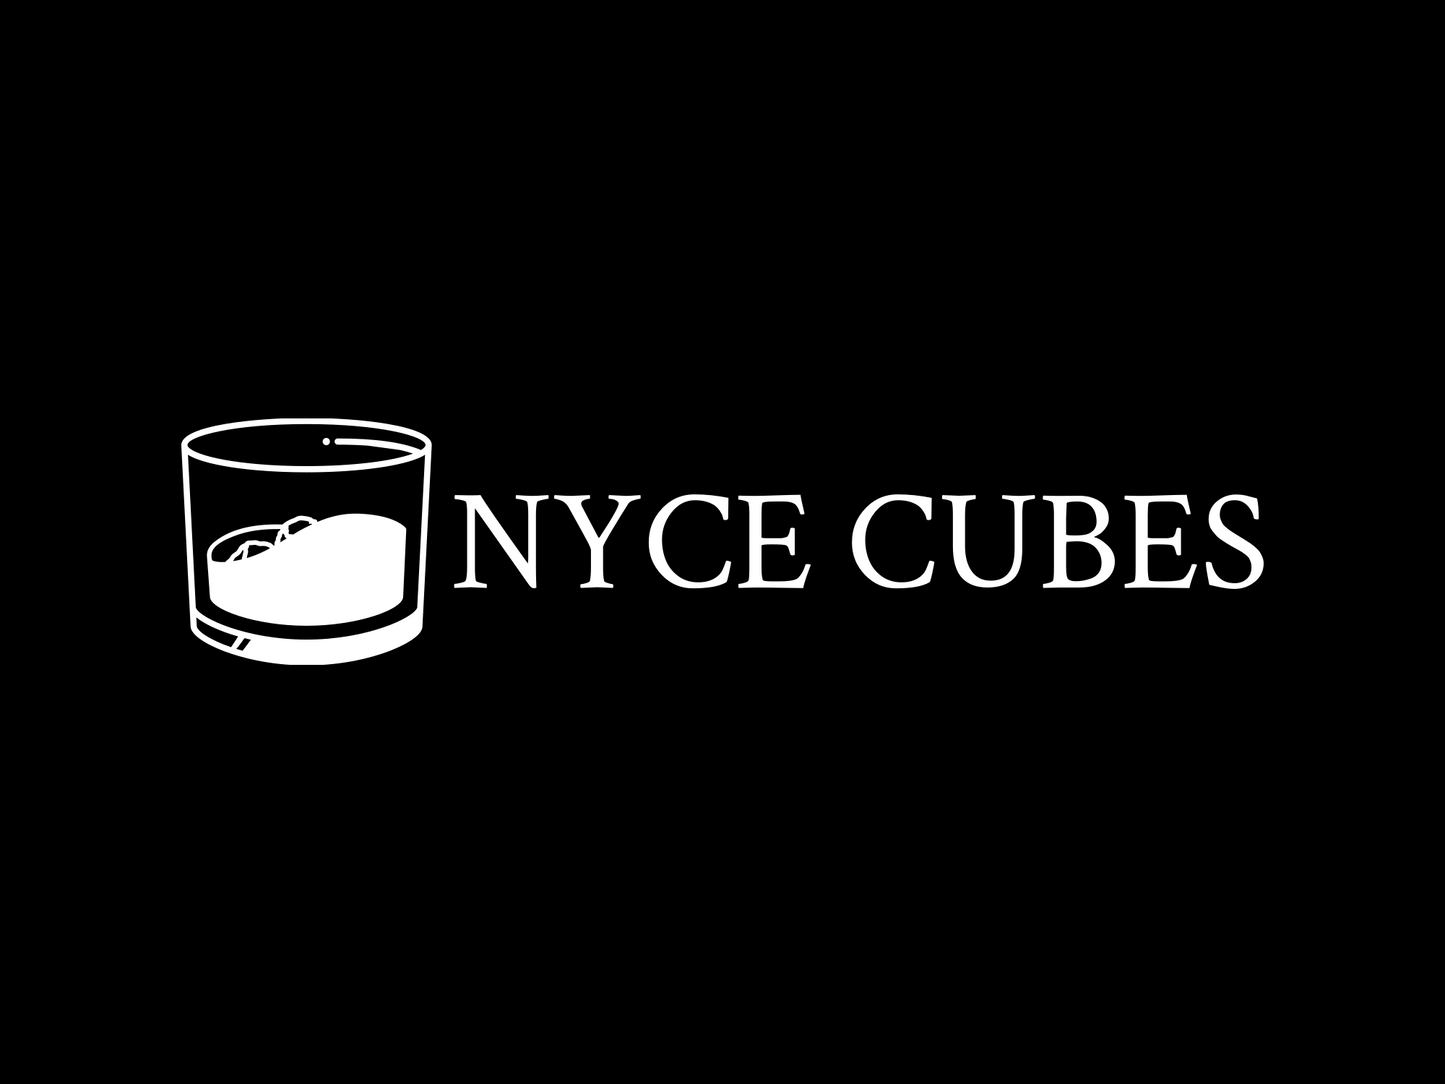 Nyce Cubes